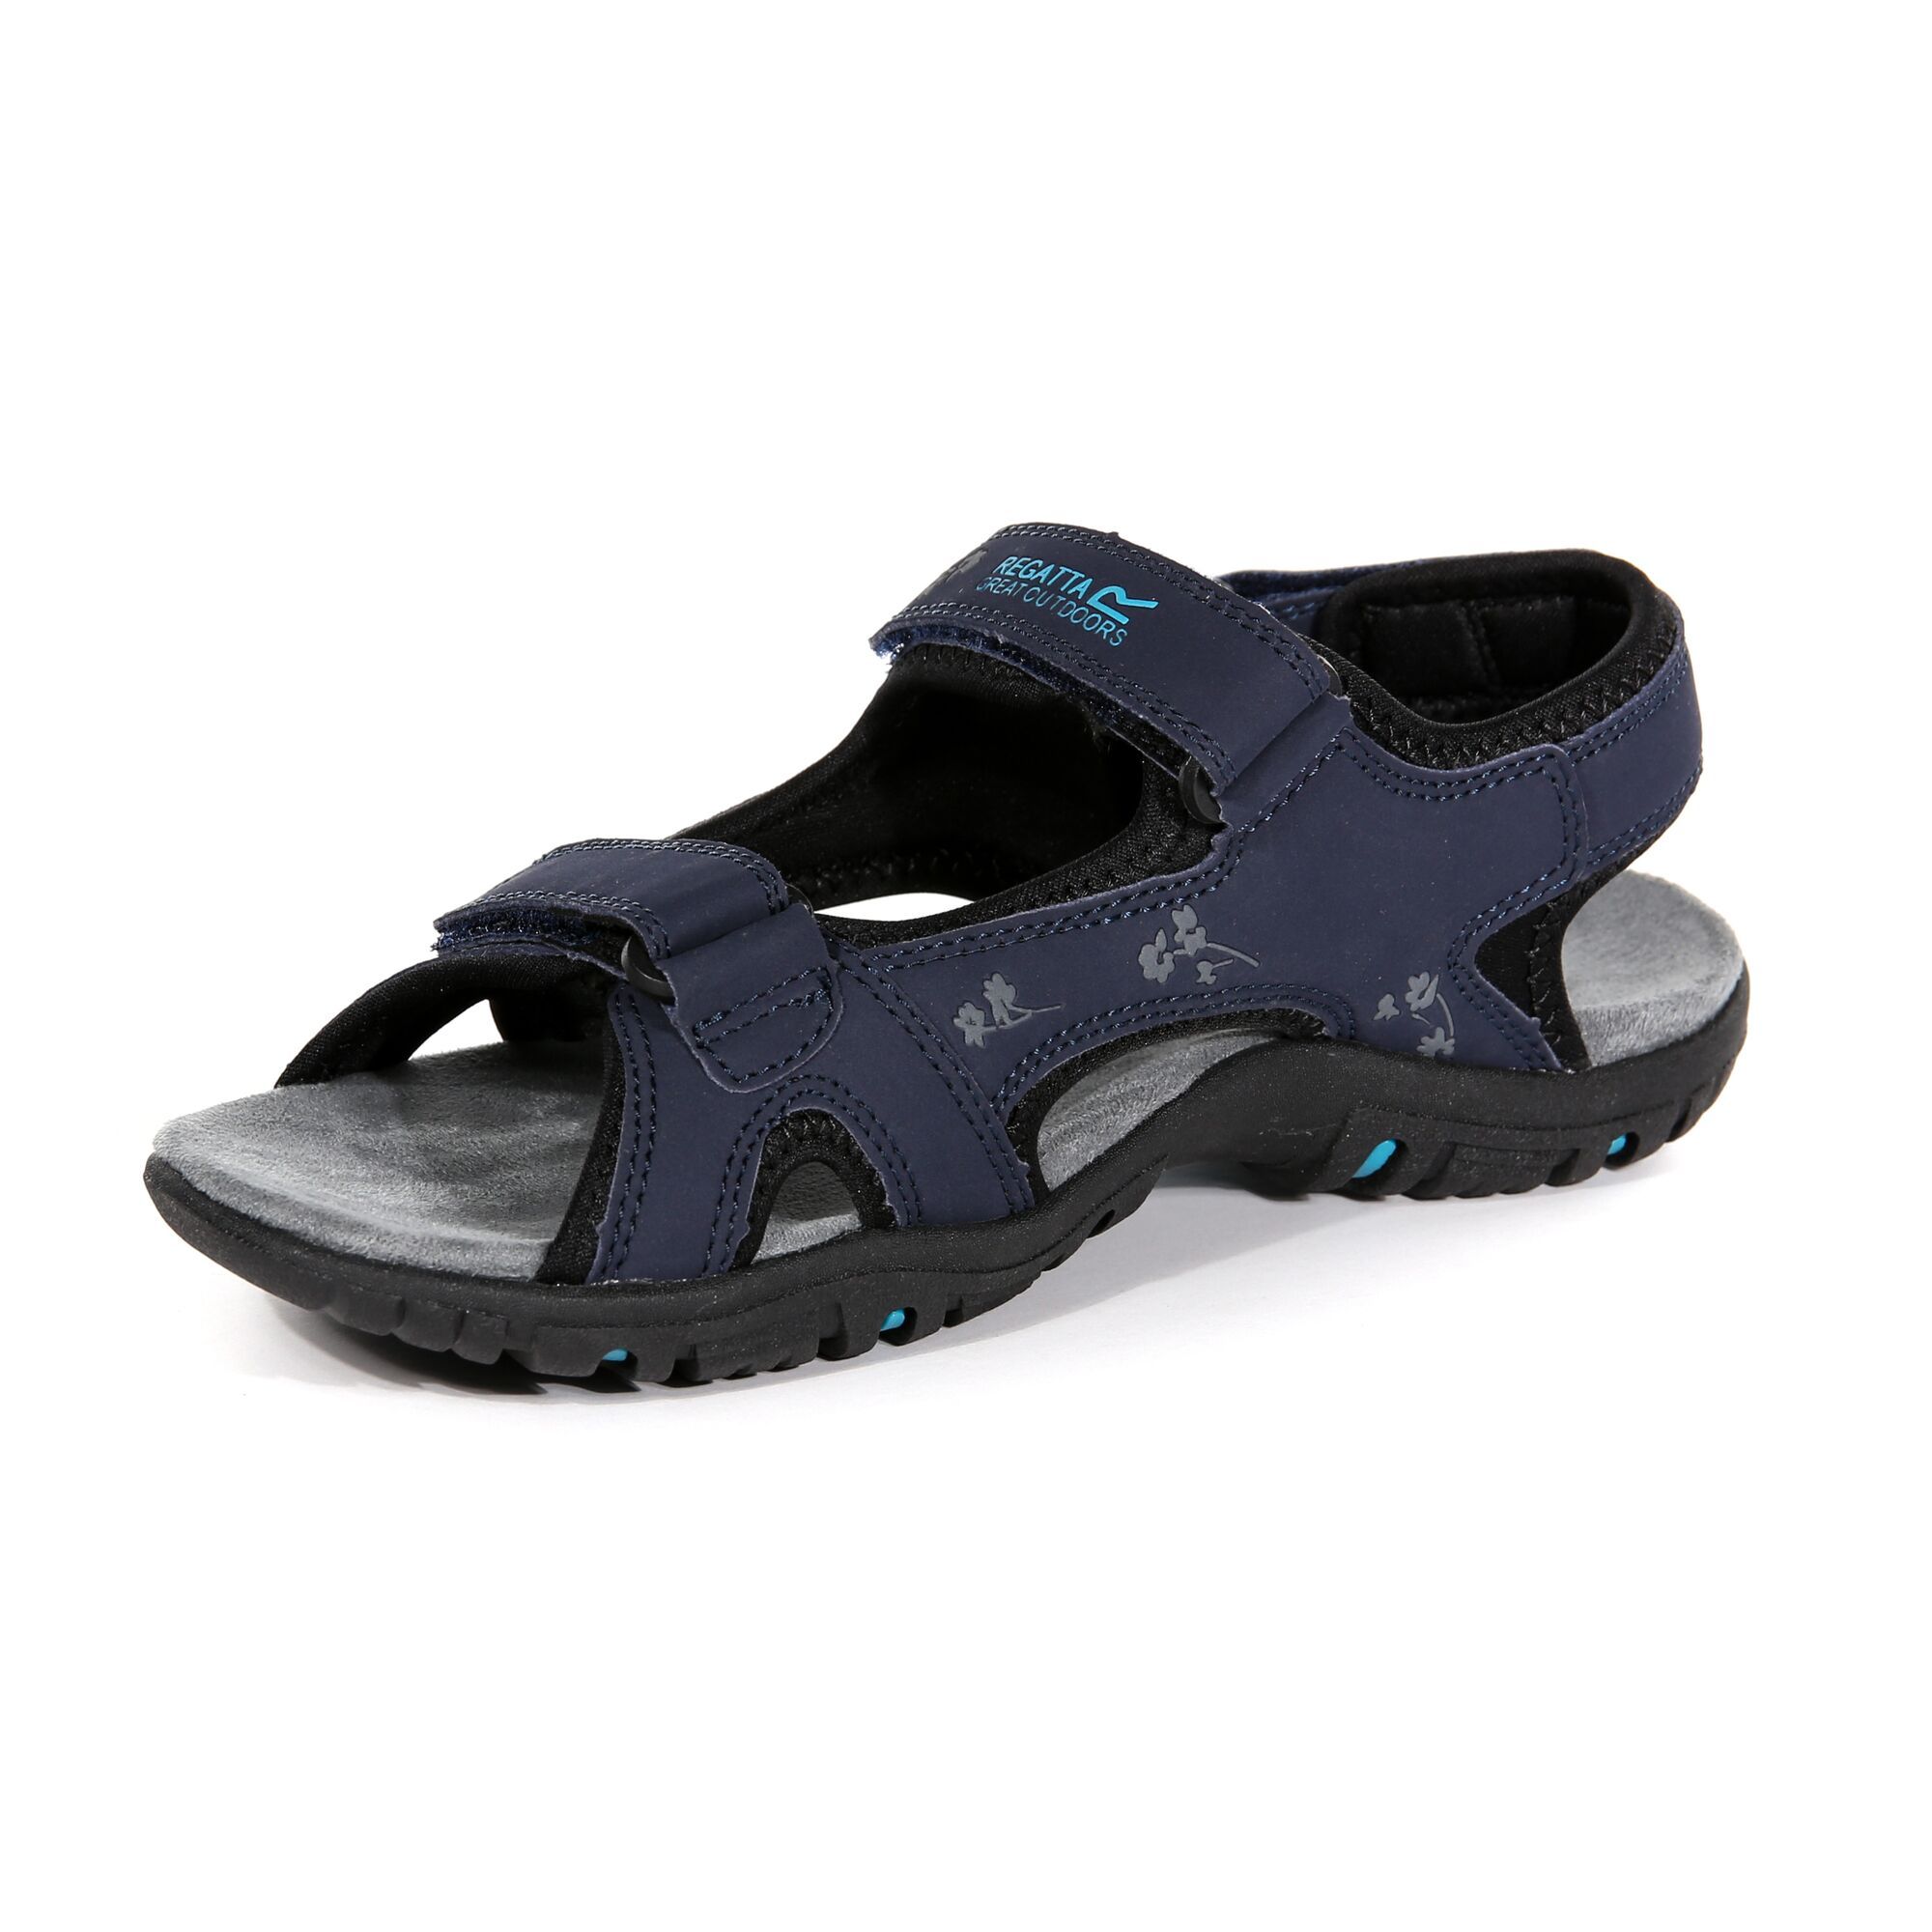 Material: 90% Polyurethane, 10% Polyester. Tumbled PU leather upper. Lined with soft and stretchy spandex with three adjustable straps for a versatile fit. PU instep stability arm. Textile covered, compression moulded, EVA midsole - shock absorbing layer under foot. Lightweight TPR outsole - hardwearing, slip resistant, durable outsole.